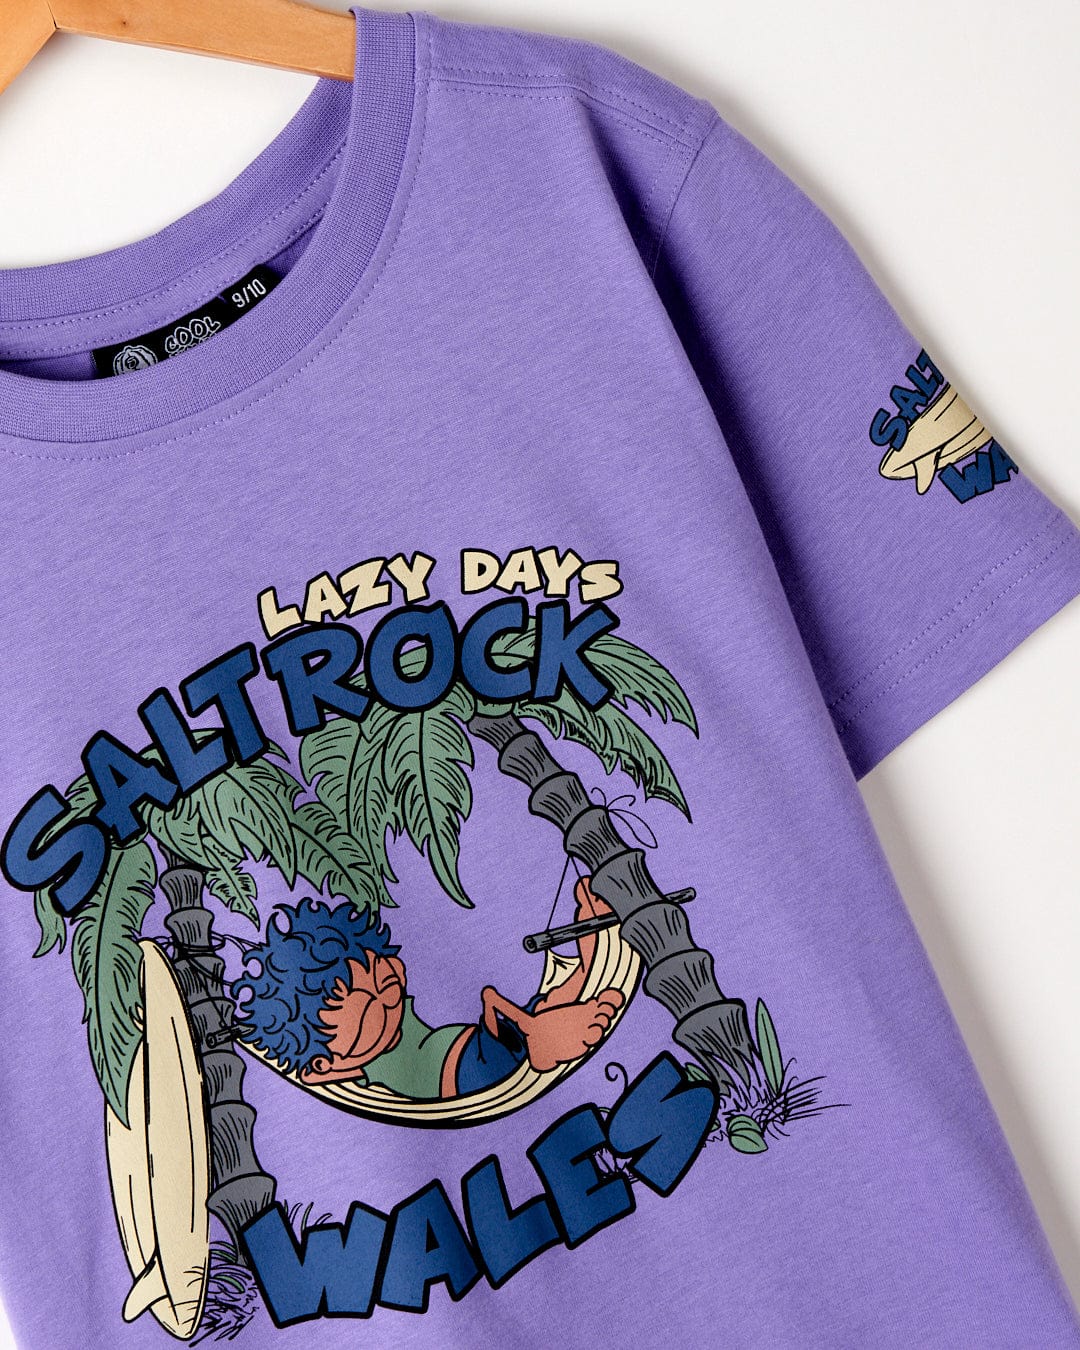 A purple, cotton material t-shirt with a graphic of a person lounging in a hammock and the text "Saltrock Wales, Lazy Days" displayed on the front.